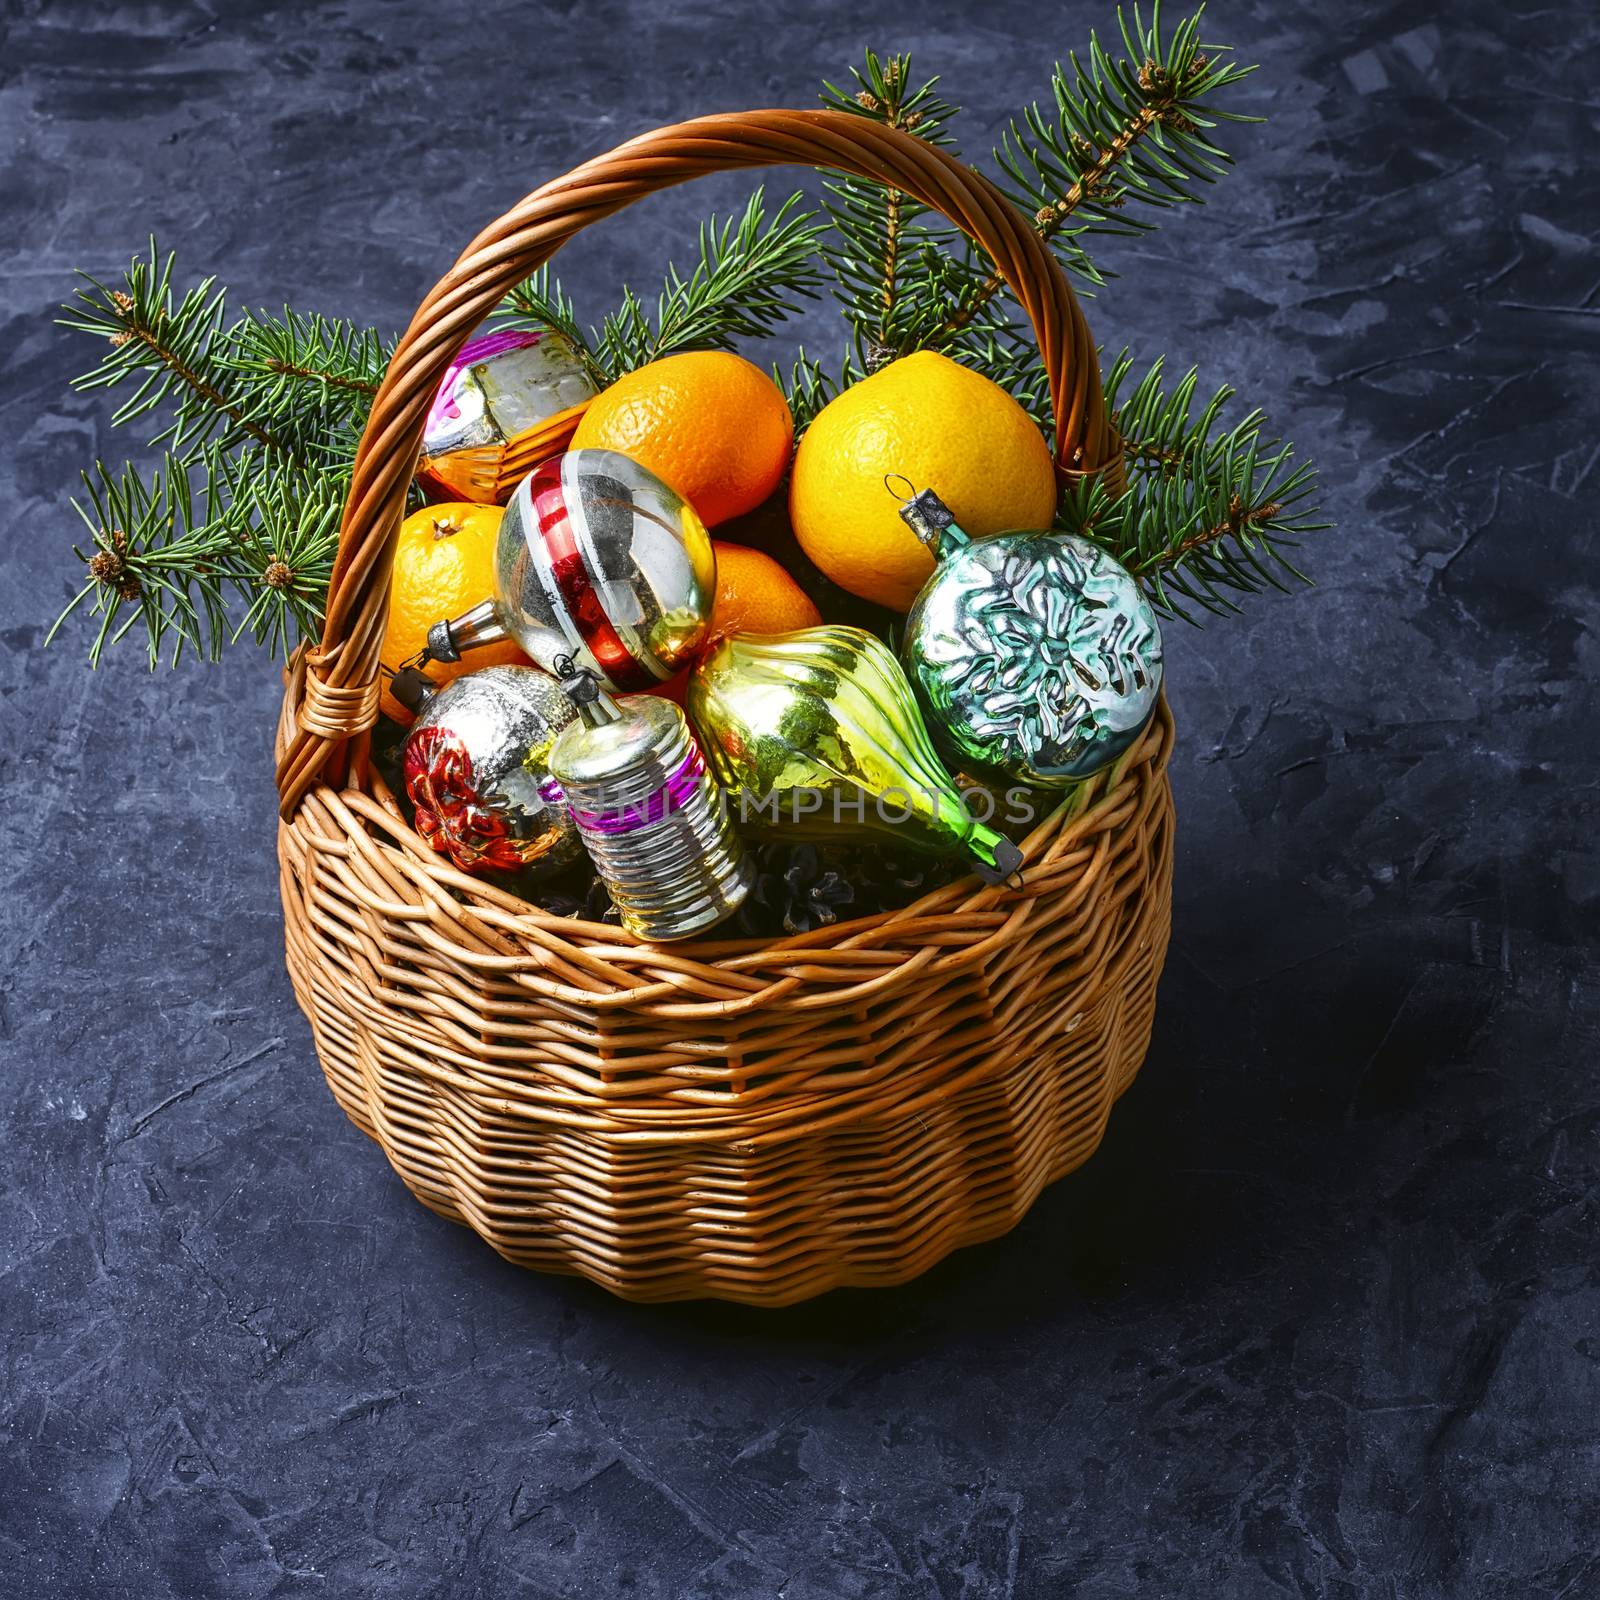 decorated basket for Christmas by LMykola